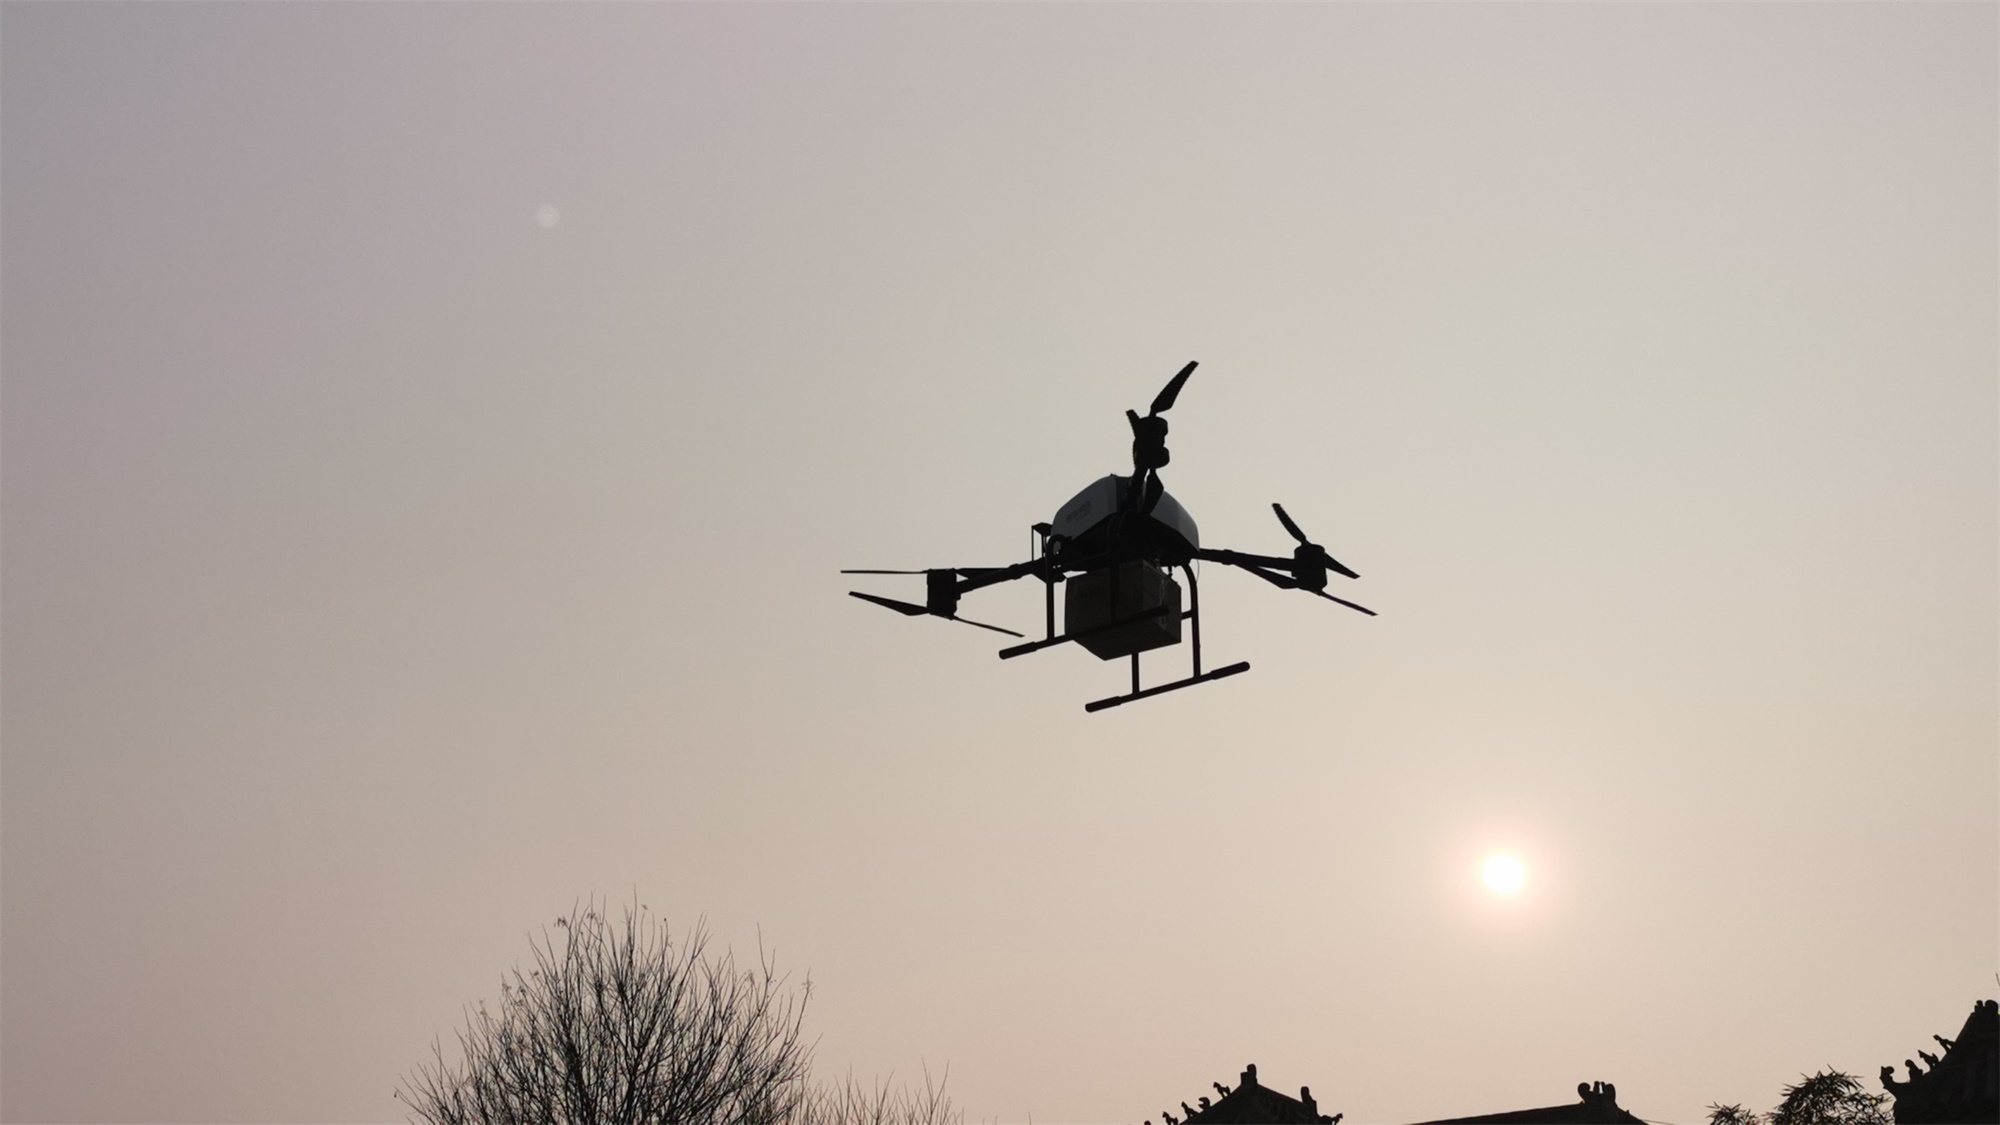 JD started drone delivery in Baiyangdian, Hebei Province.